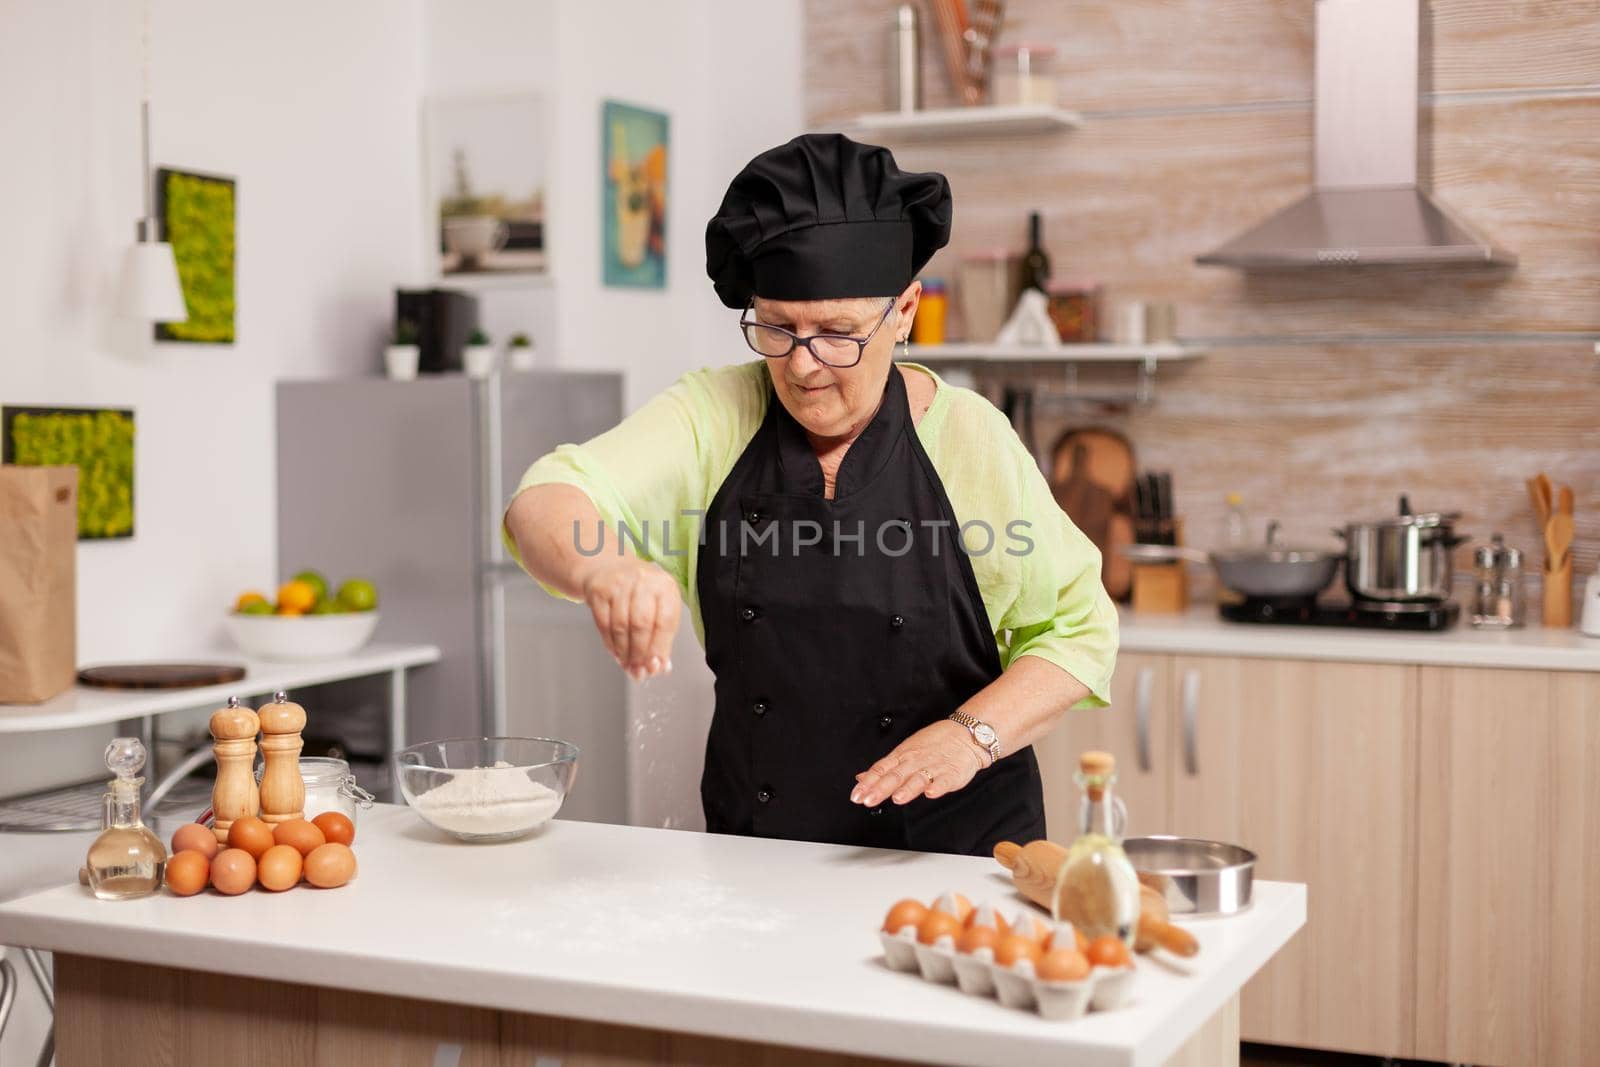 Elderly chef with uniform sprinkling flour in home kitchen wearing apron and bonette. Happy elderly chef with uniform sprinkling, sieving sifting raw ingredients by hand baking homemade pizza.